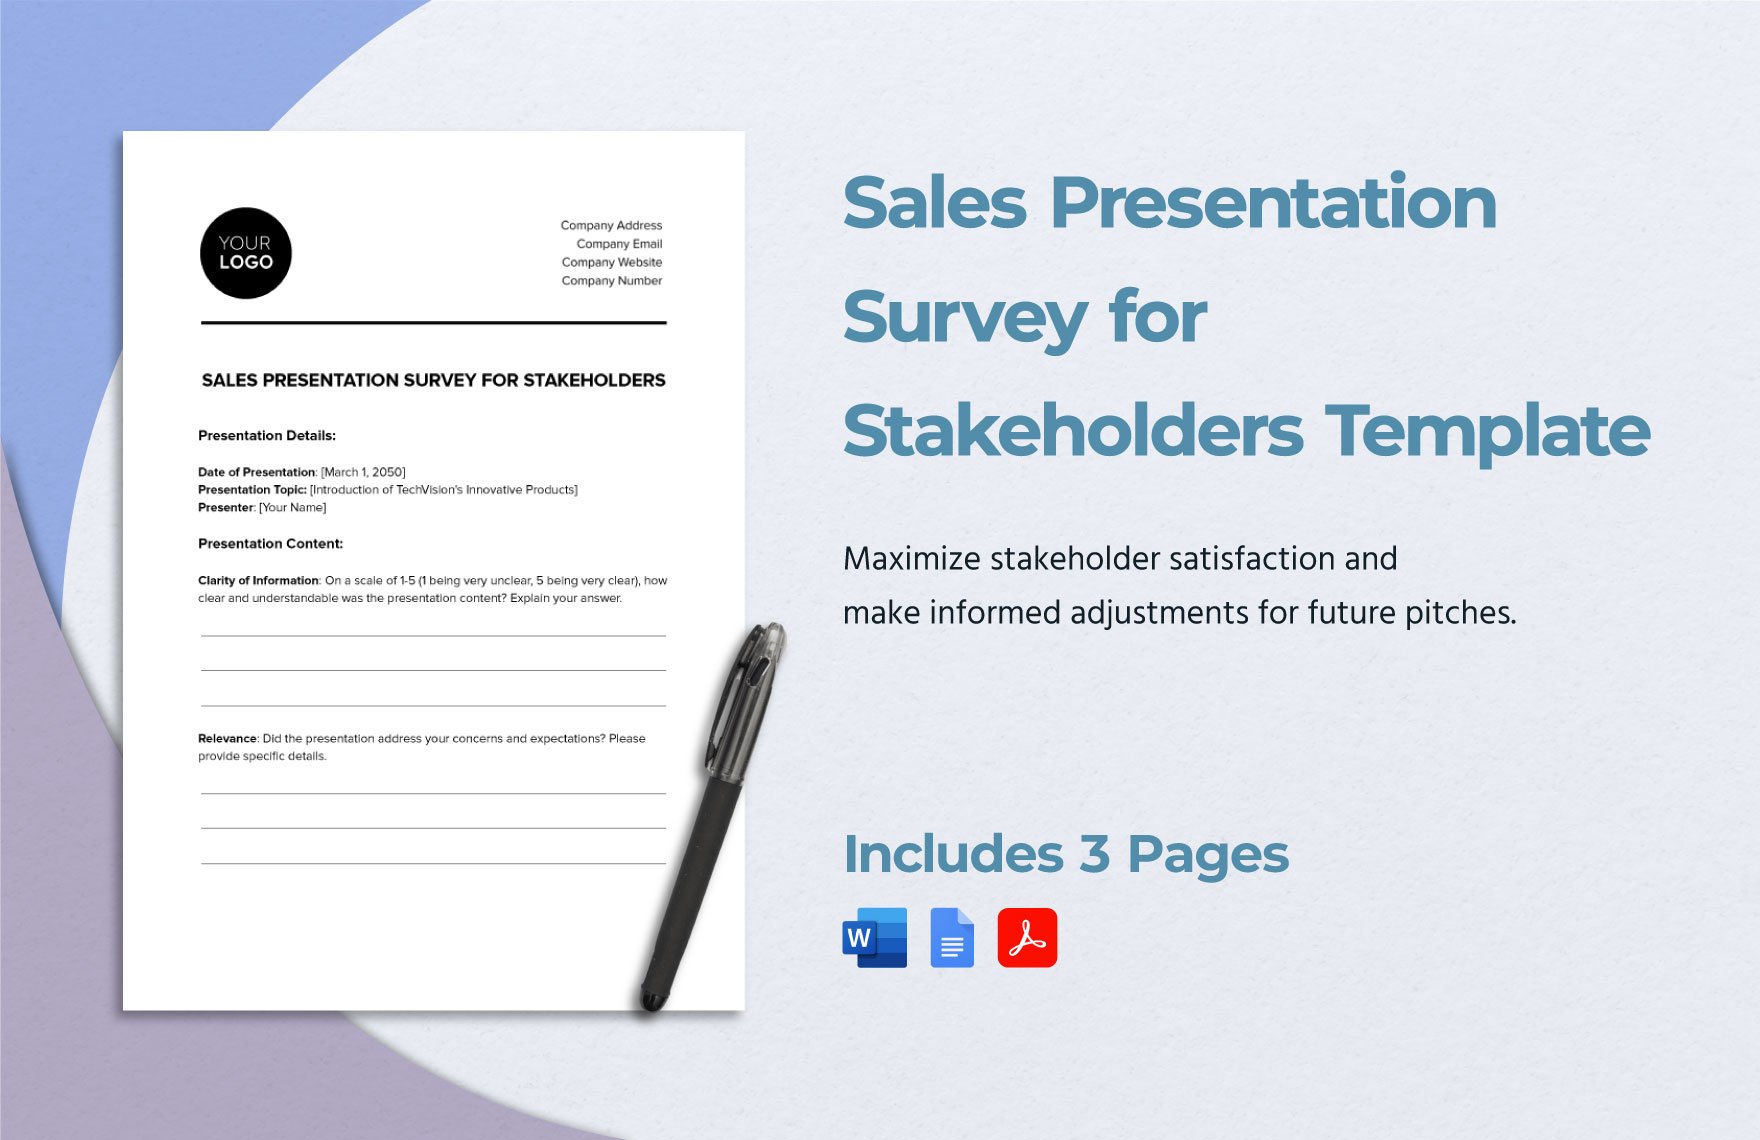 Sales Presentation Survey for Stakeholders Template in Word, Google Docs, PDF